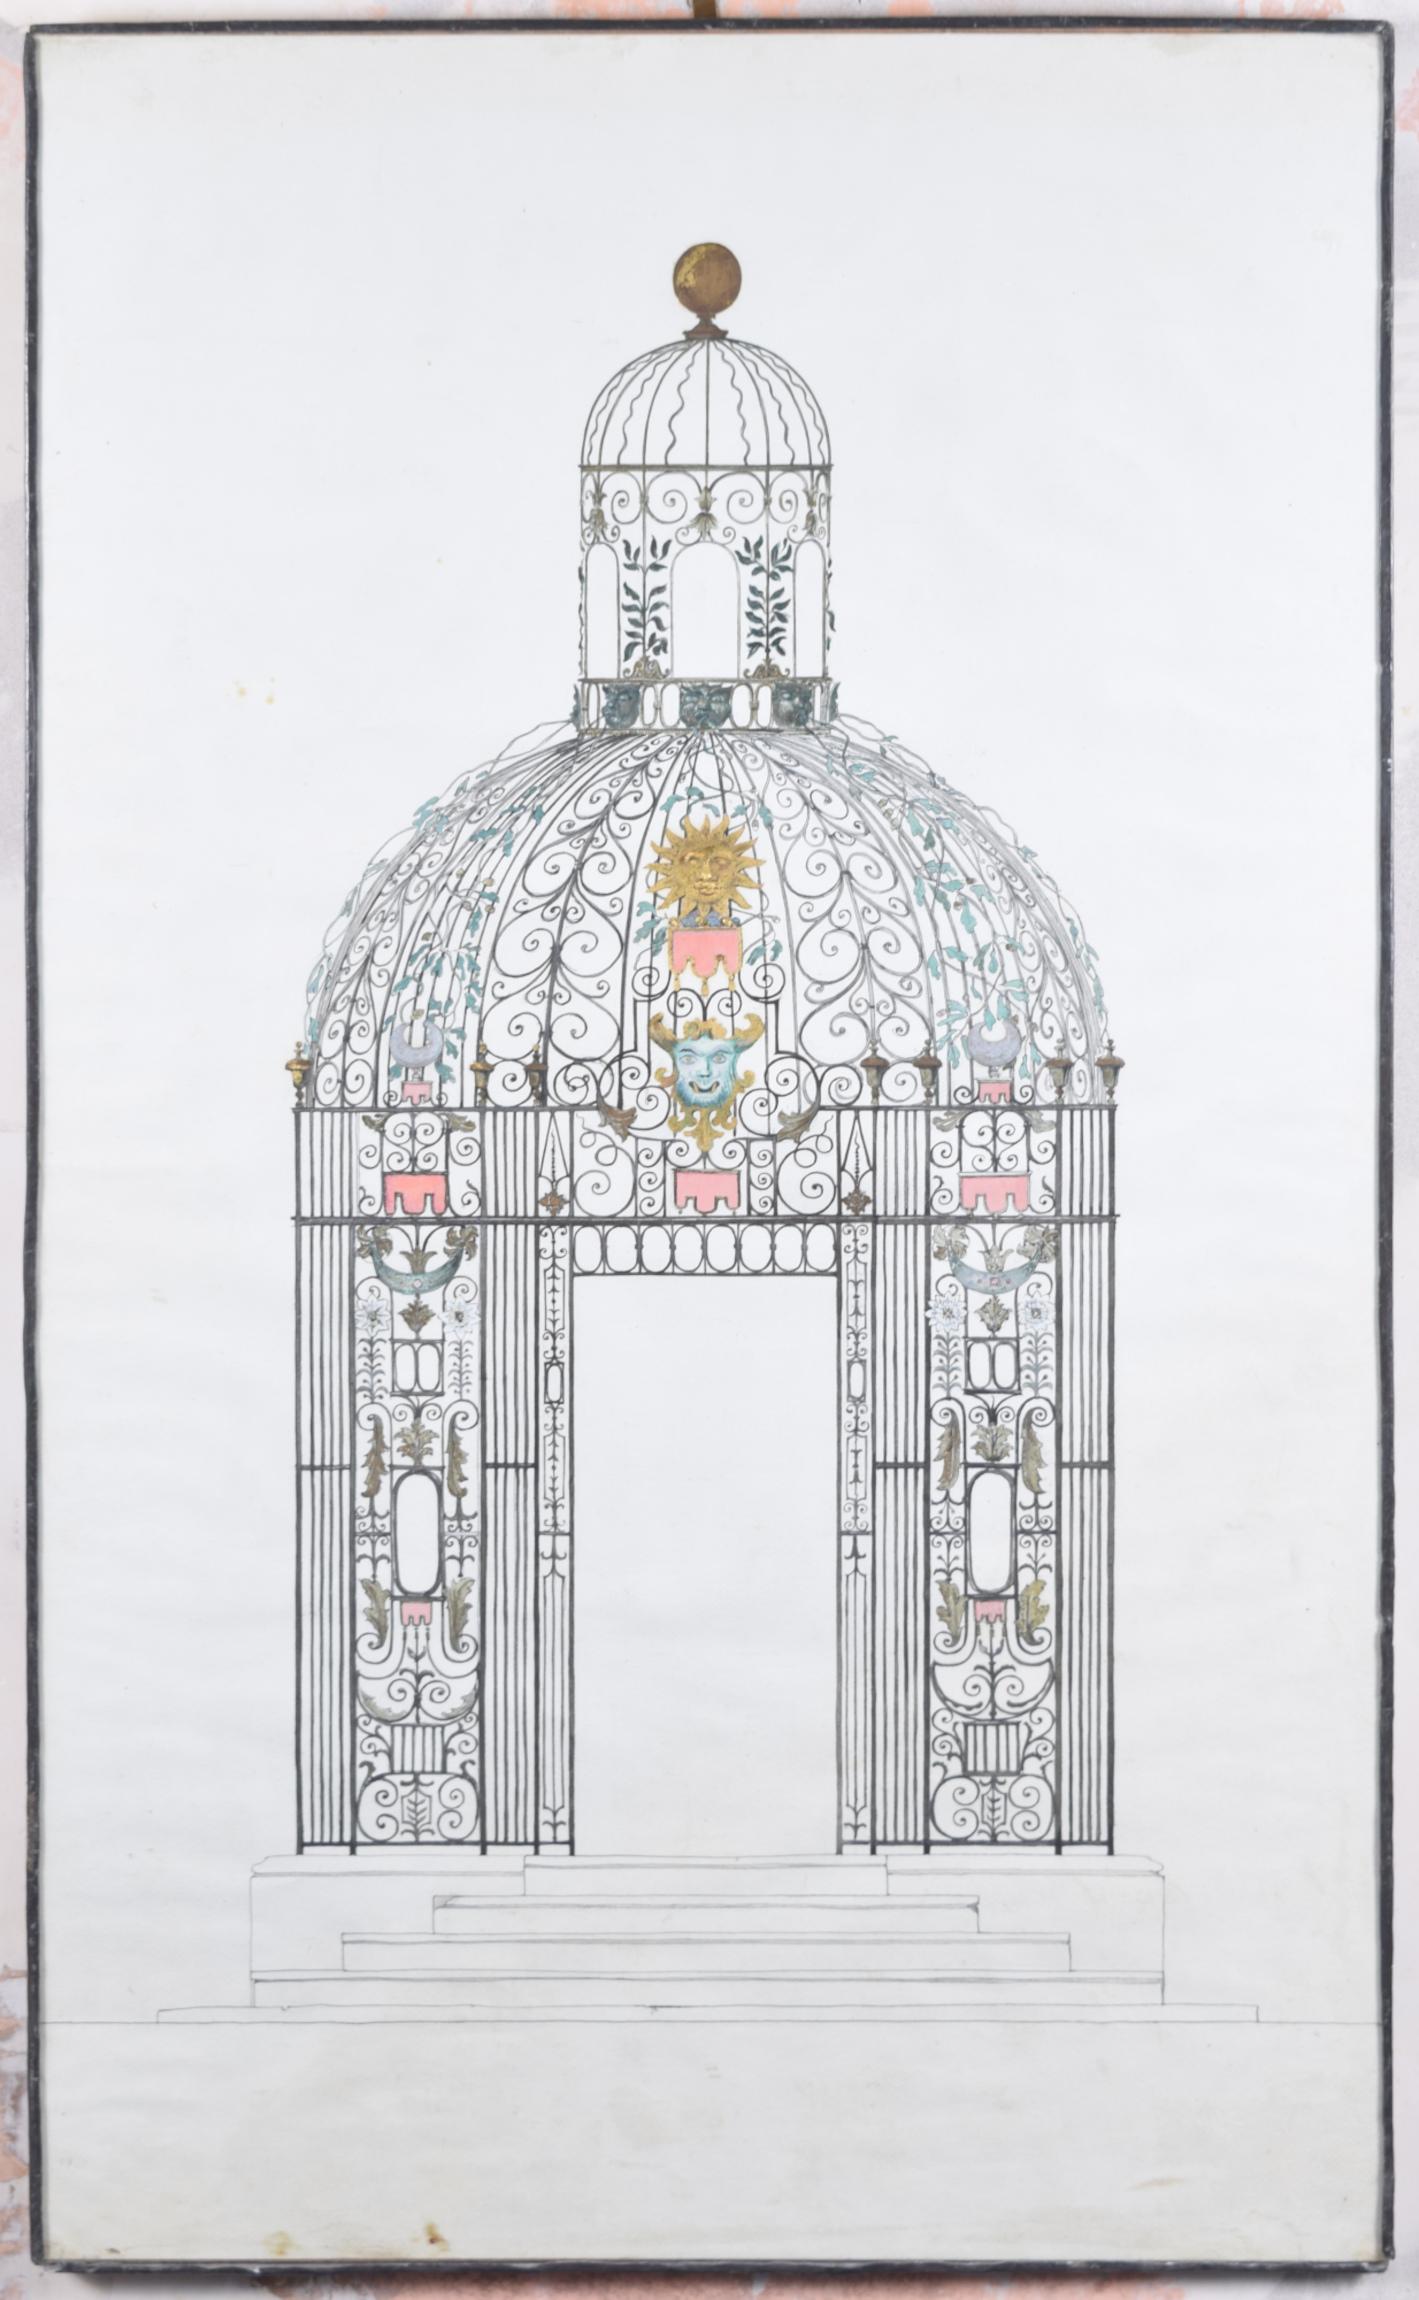 Louis Osman was an English artist, architect, goldsmith, silversmith and medallist. He is notable for the gold coronet he designed and made for the investiture in 1969 of Charles, Prince of Wales. We have acquired a large archive of Osman's works